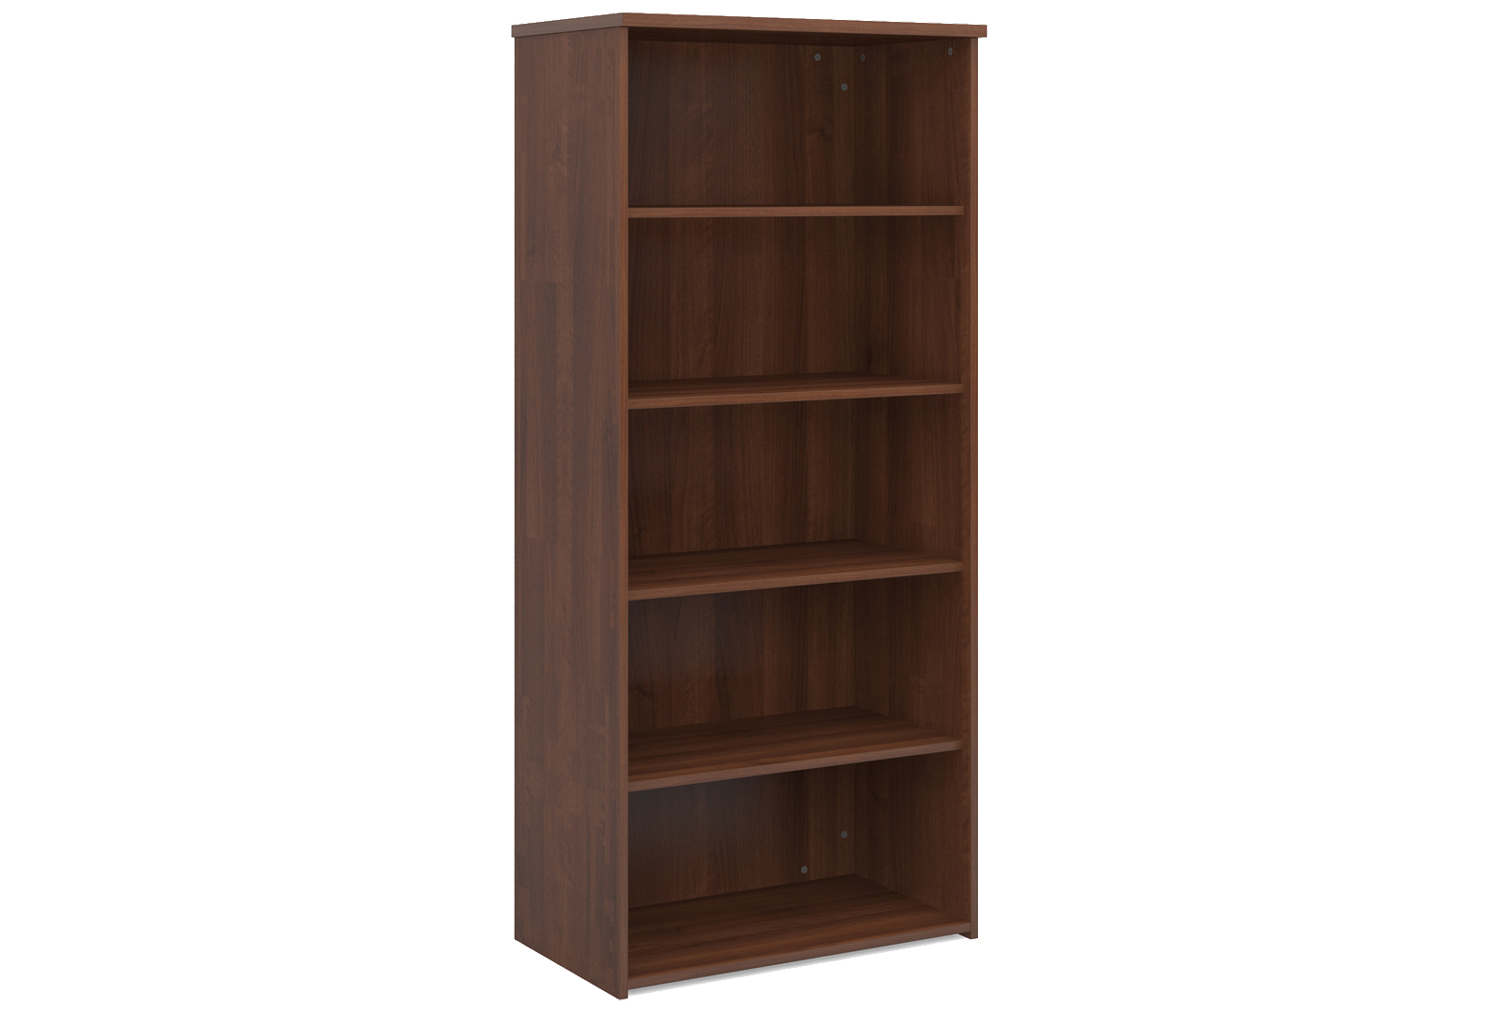 Thrifty Next-Day Office Bookcases Walnut, 4 Shelf - 80wx47dx179h (cm), Express Delivery